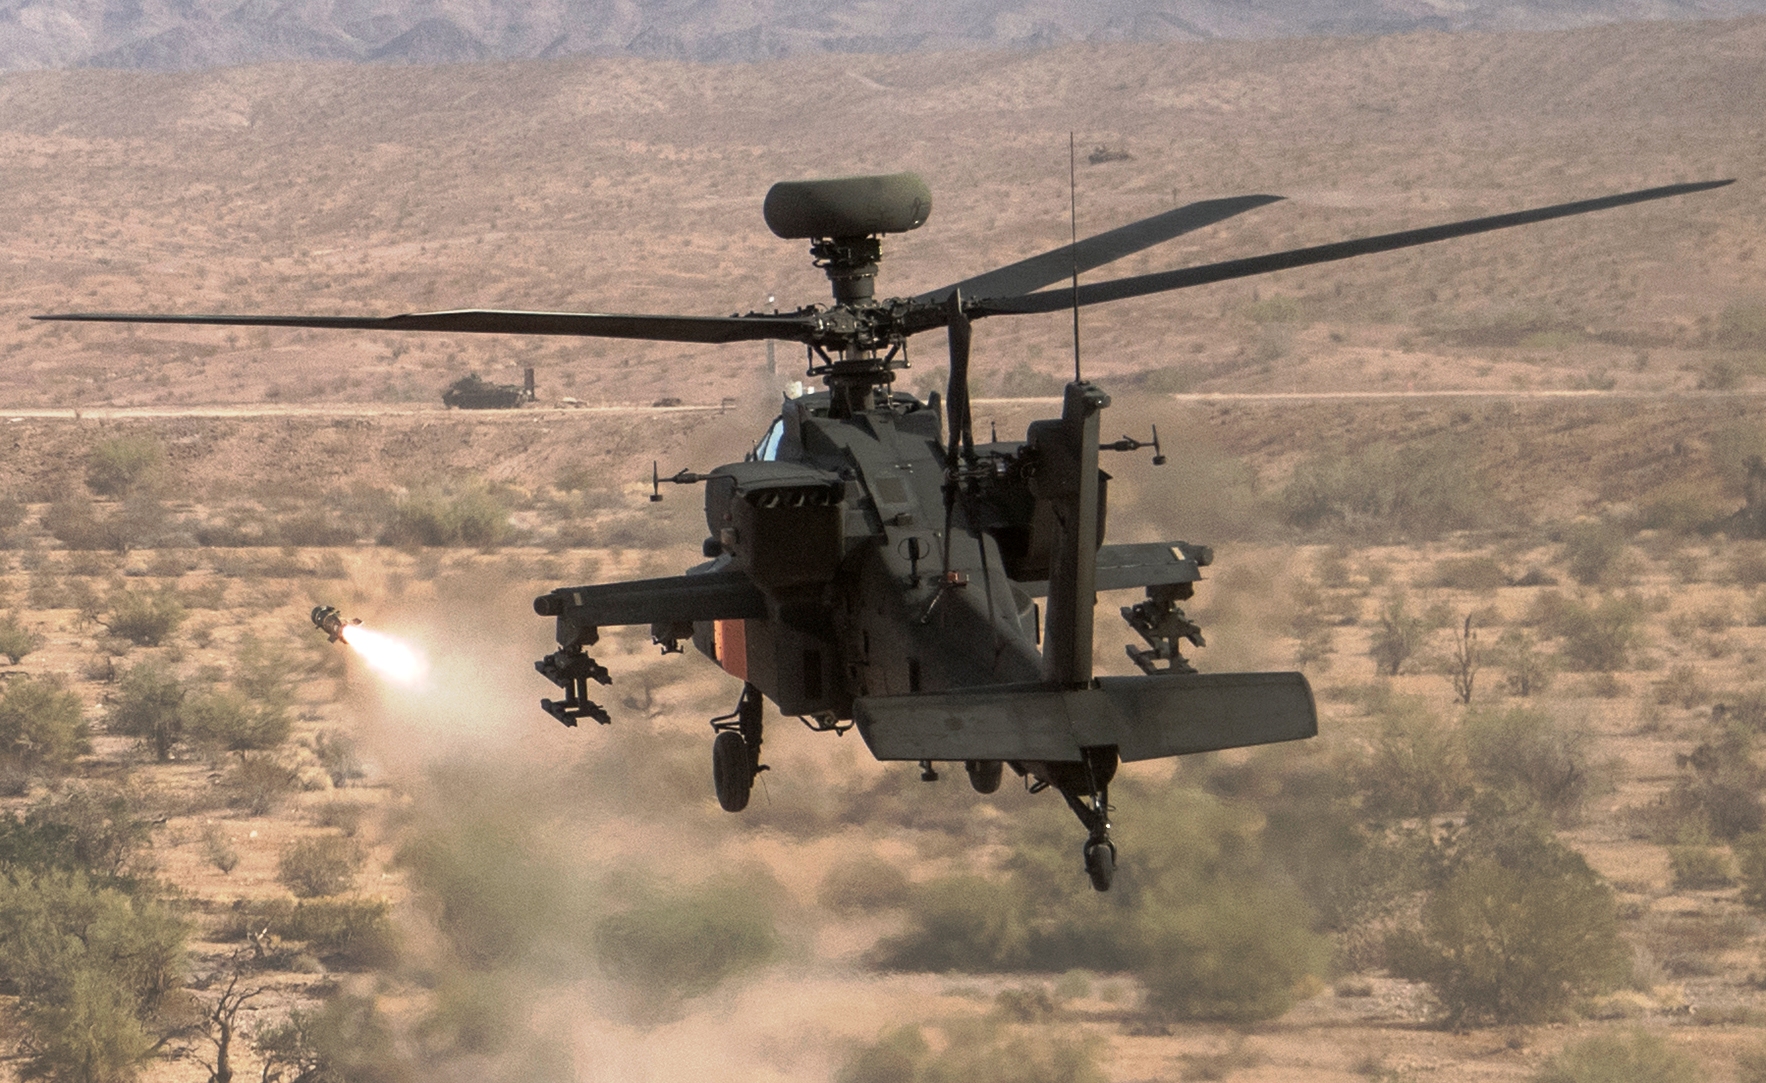 The AH-64 can carry a wide variety of weapons.